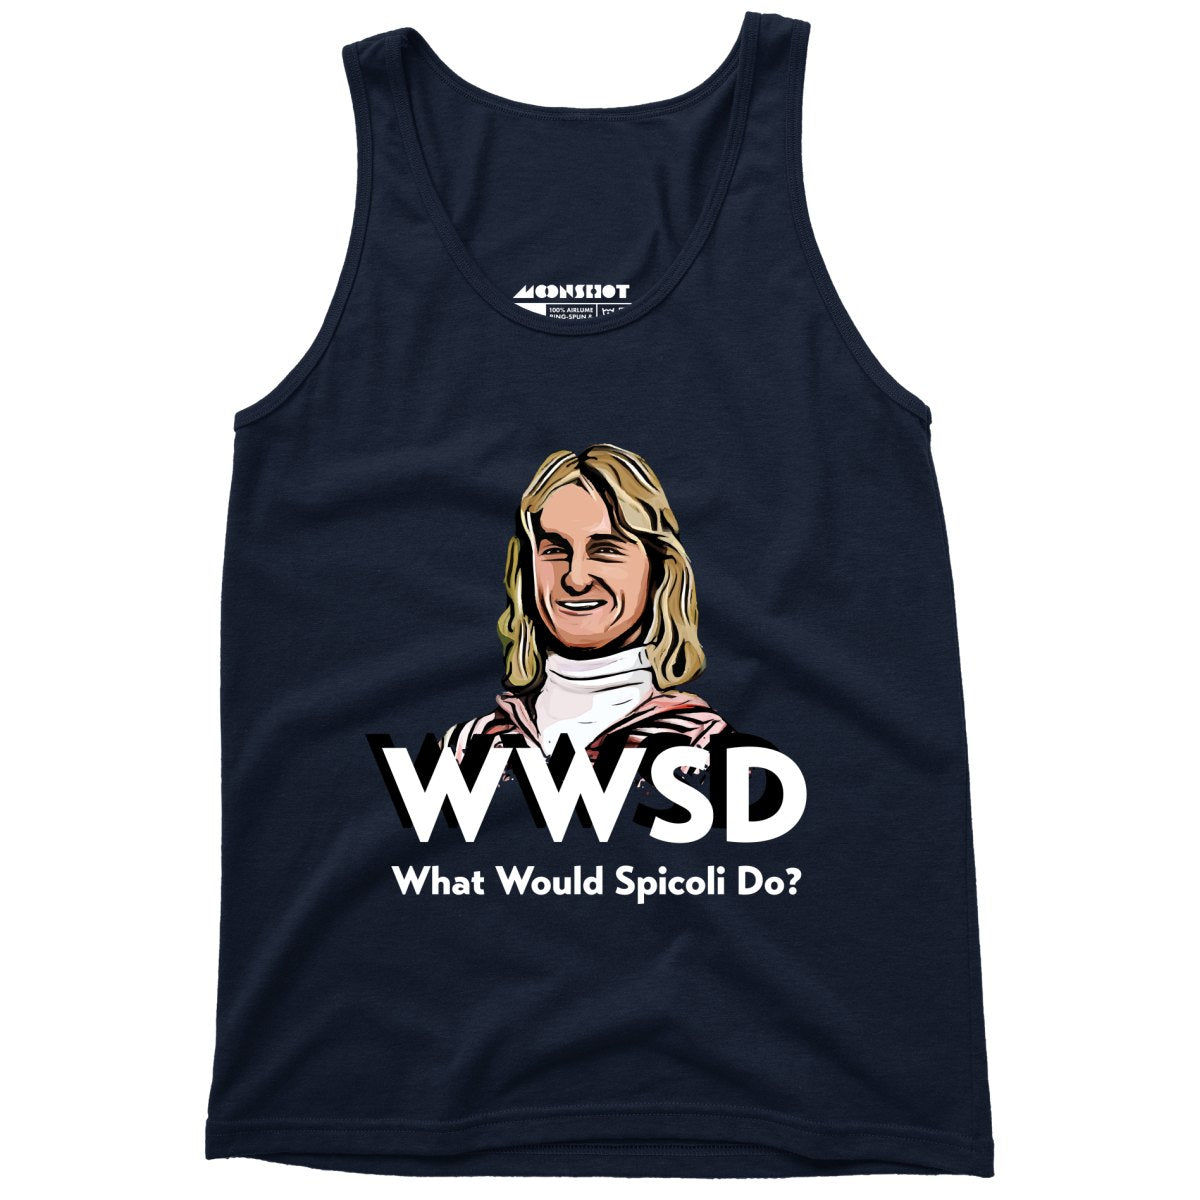 What Would Spicoli Do? - Unisex Tank Top